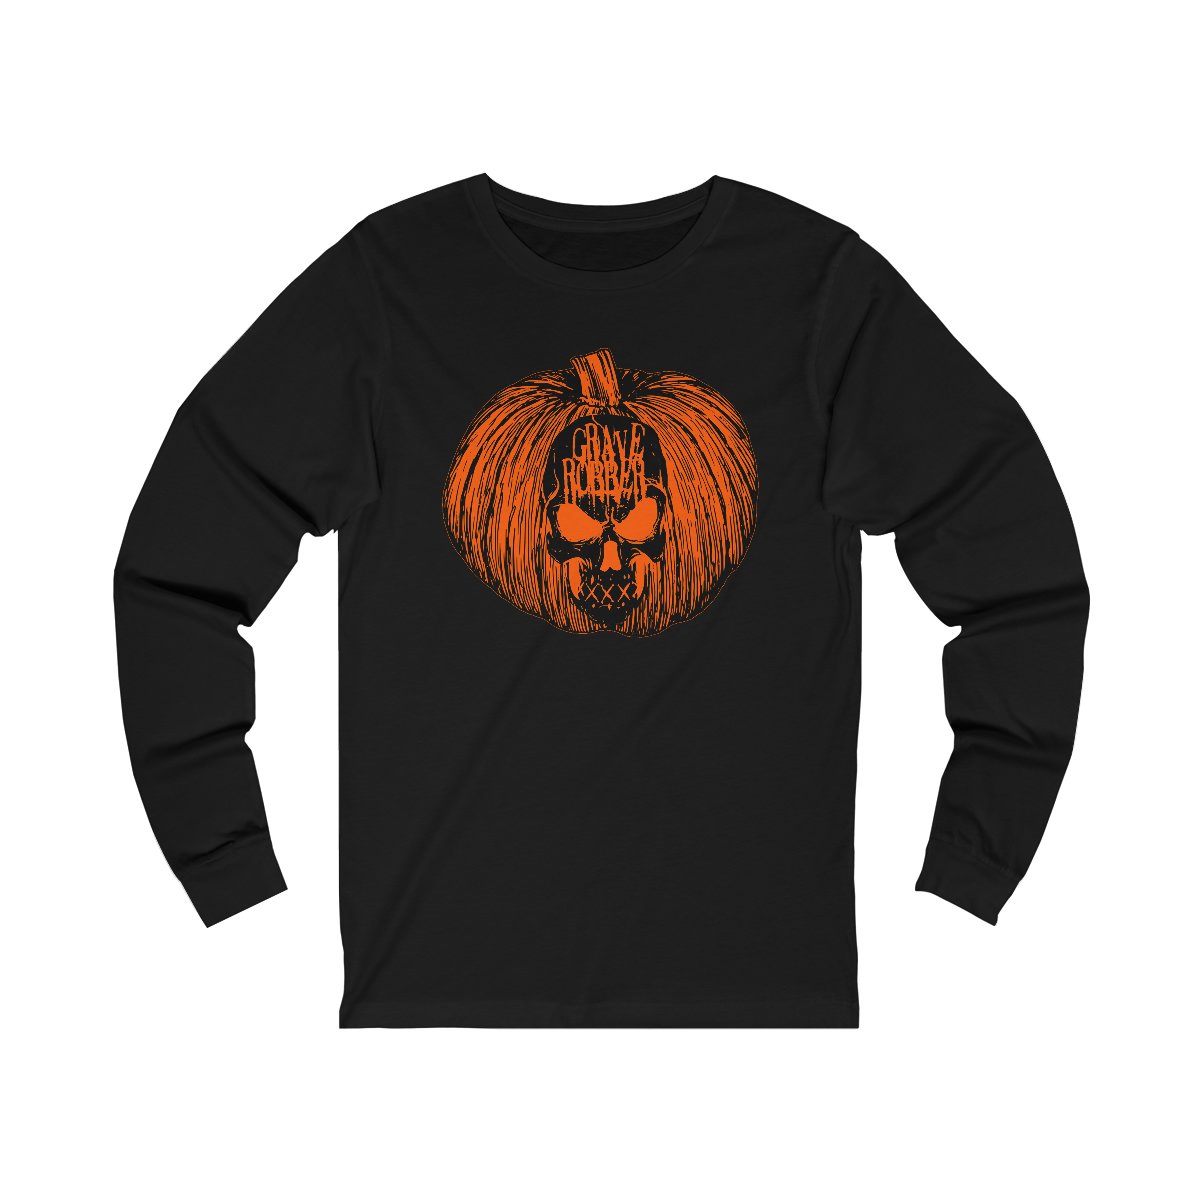 Grave Robber Pumpkin Limited Edition Long Sleeve Tshirt